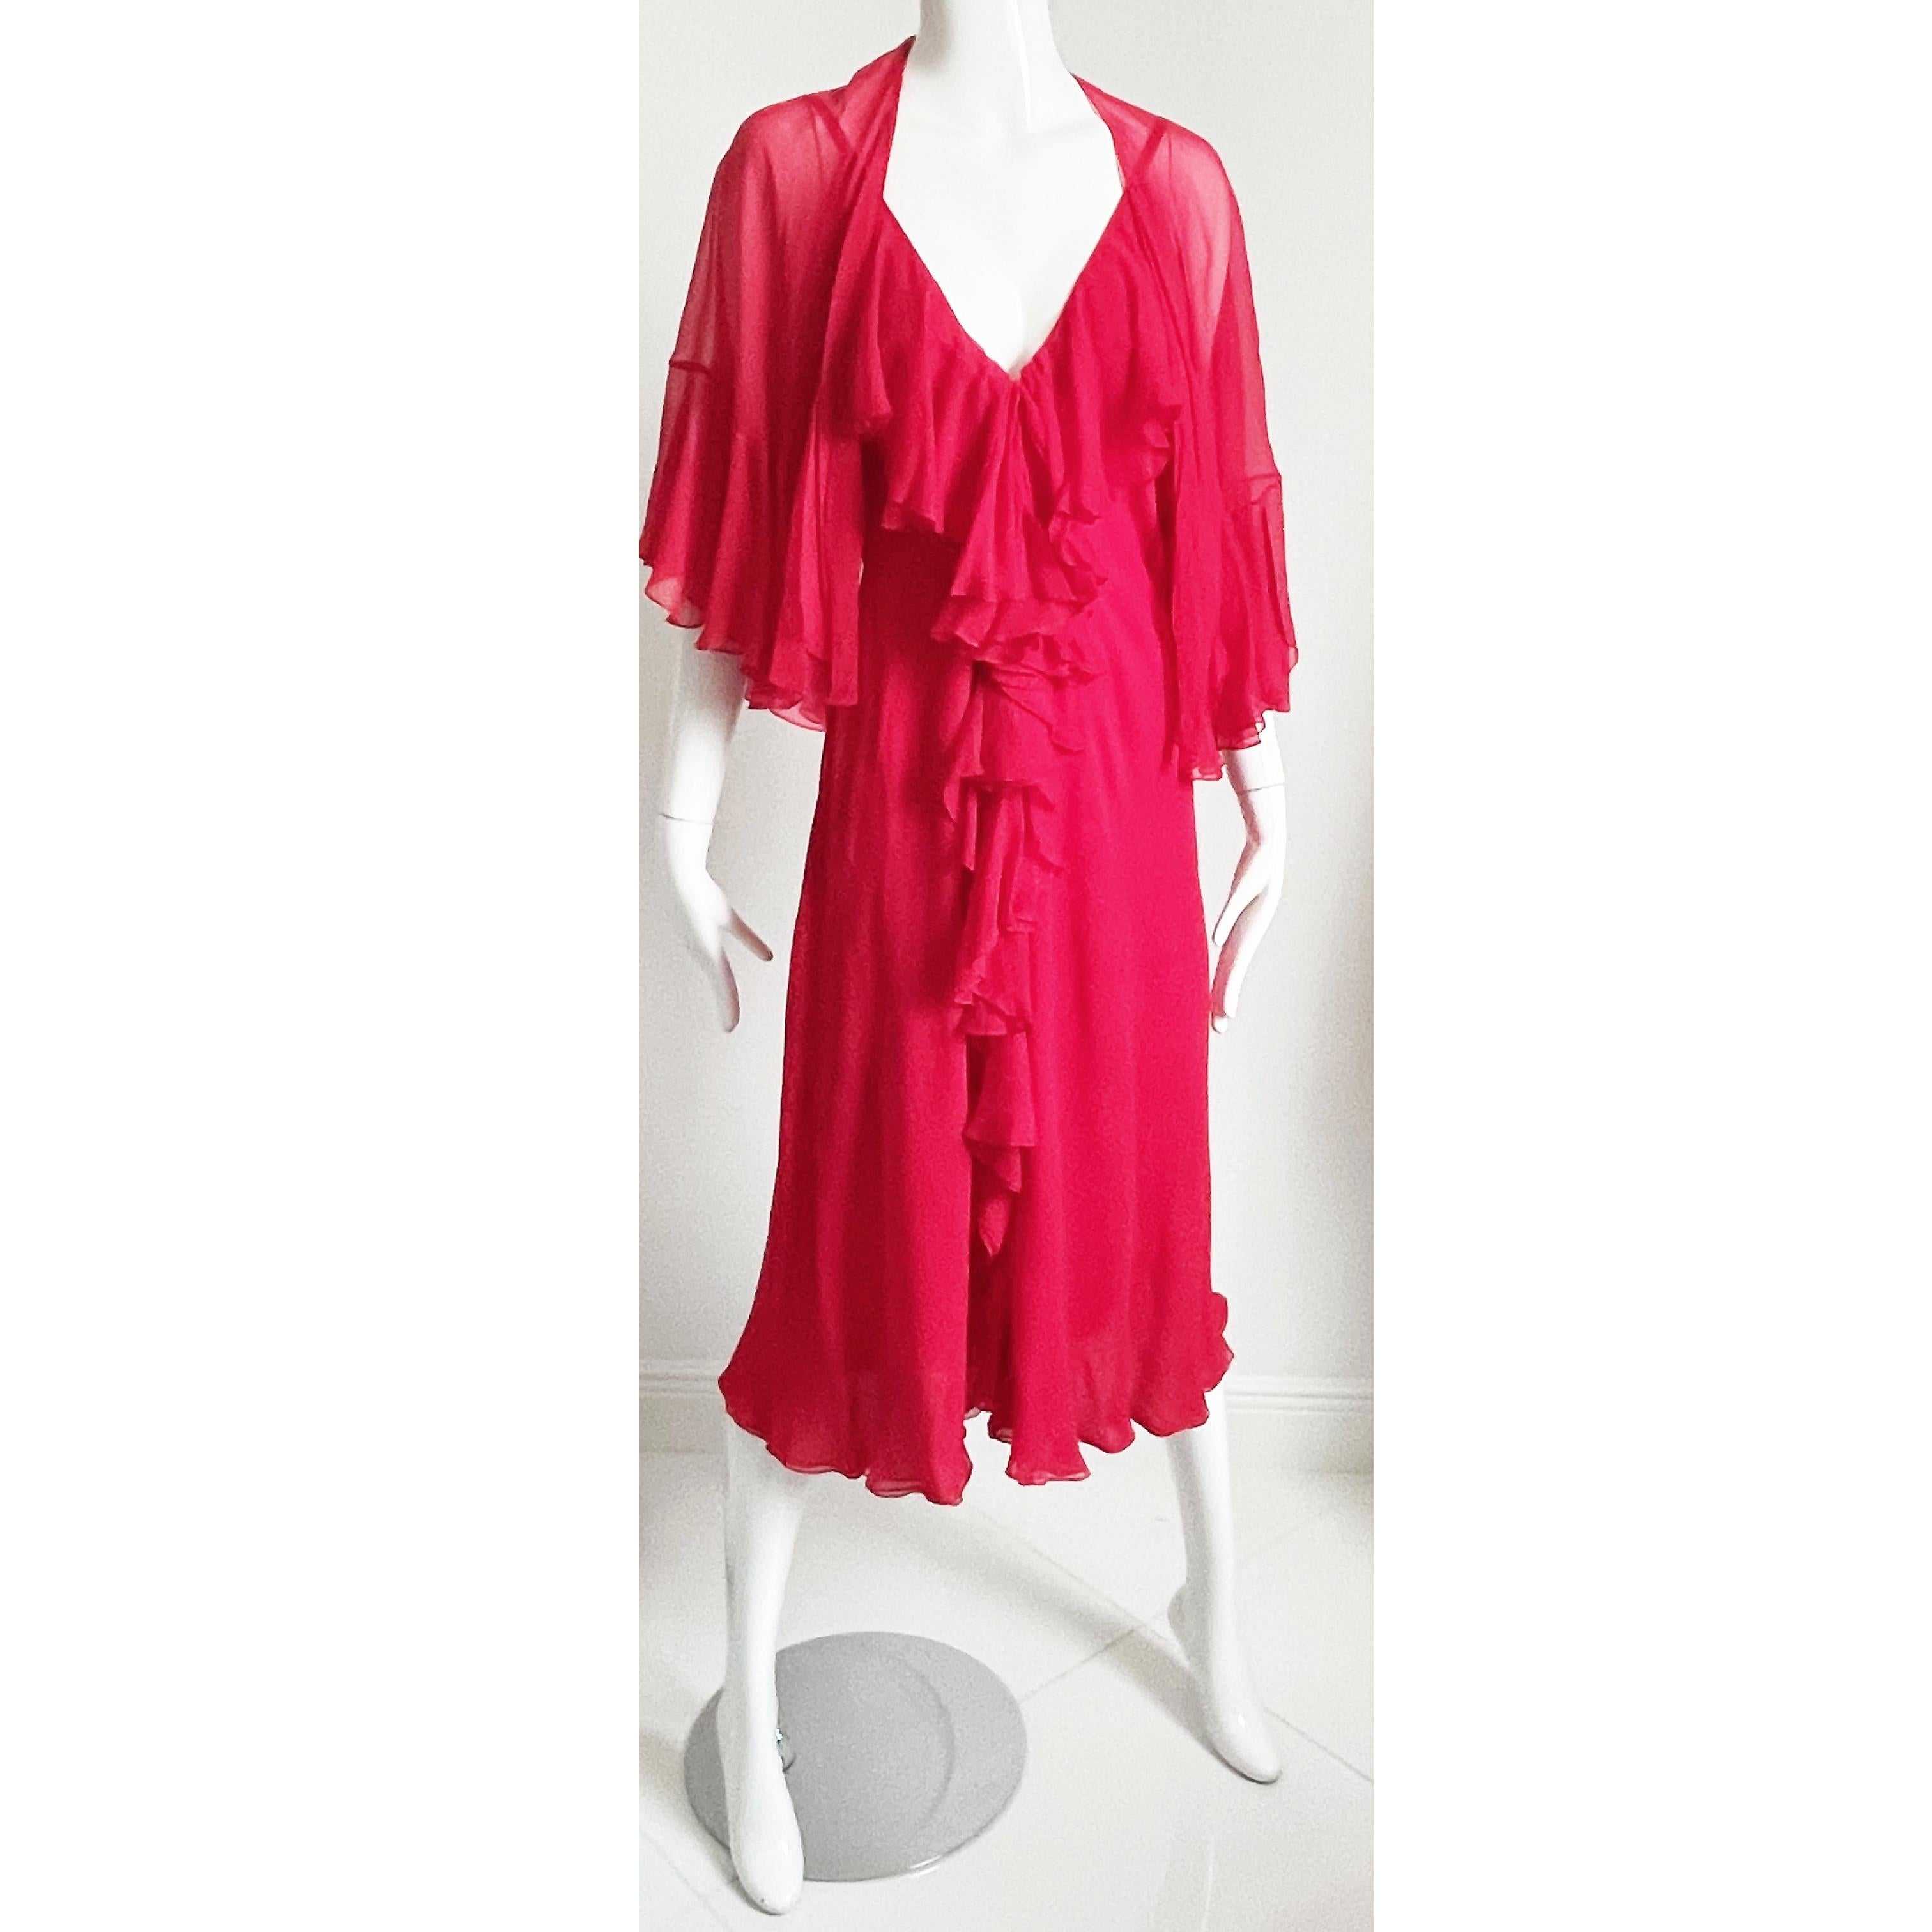 Women's or Men's Pauline Trigere Dress and Shawl 2pc Set Red Silk Chiffon Loose Ruffles Vintage For Sale